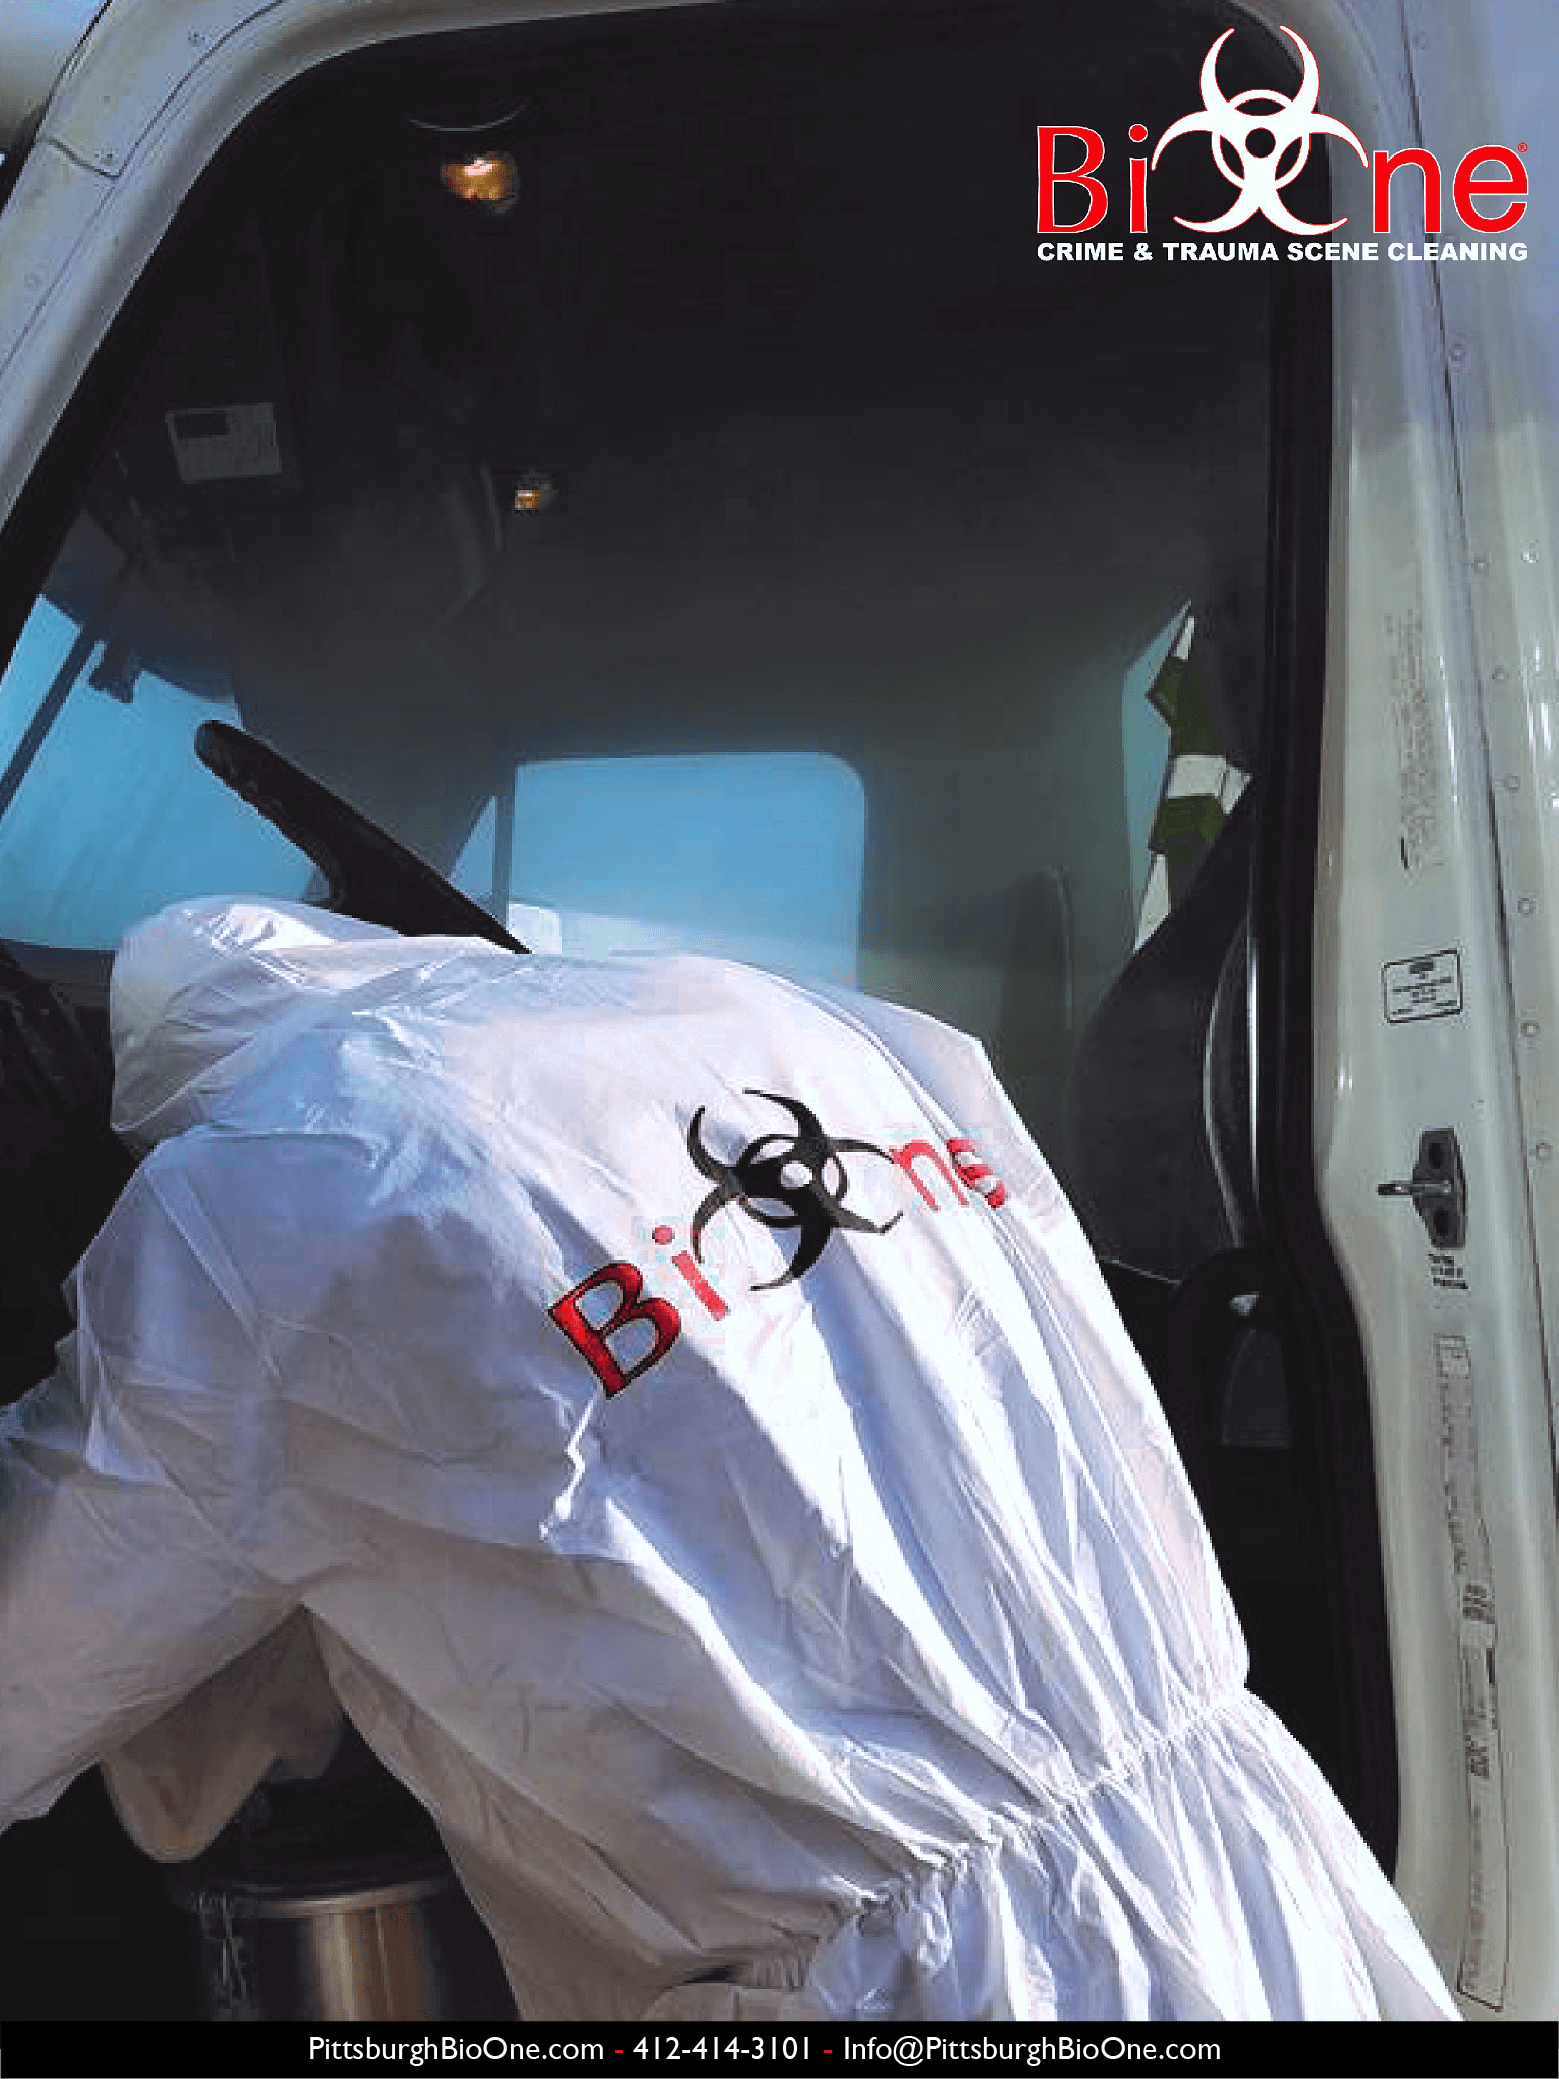 Image shows Bio-One technician dressed in hazmat and PPE cleaning an emergency vehicle (ambulance).